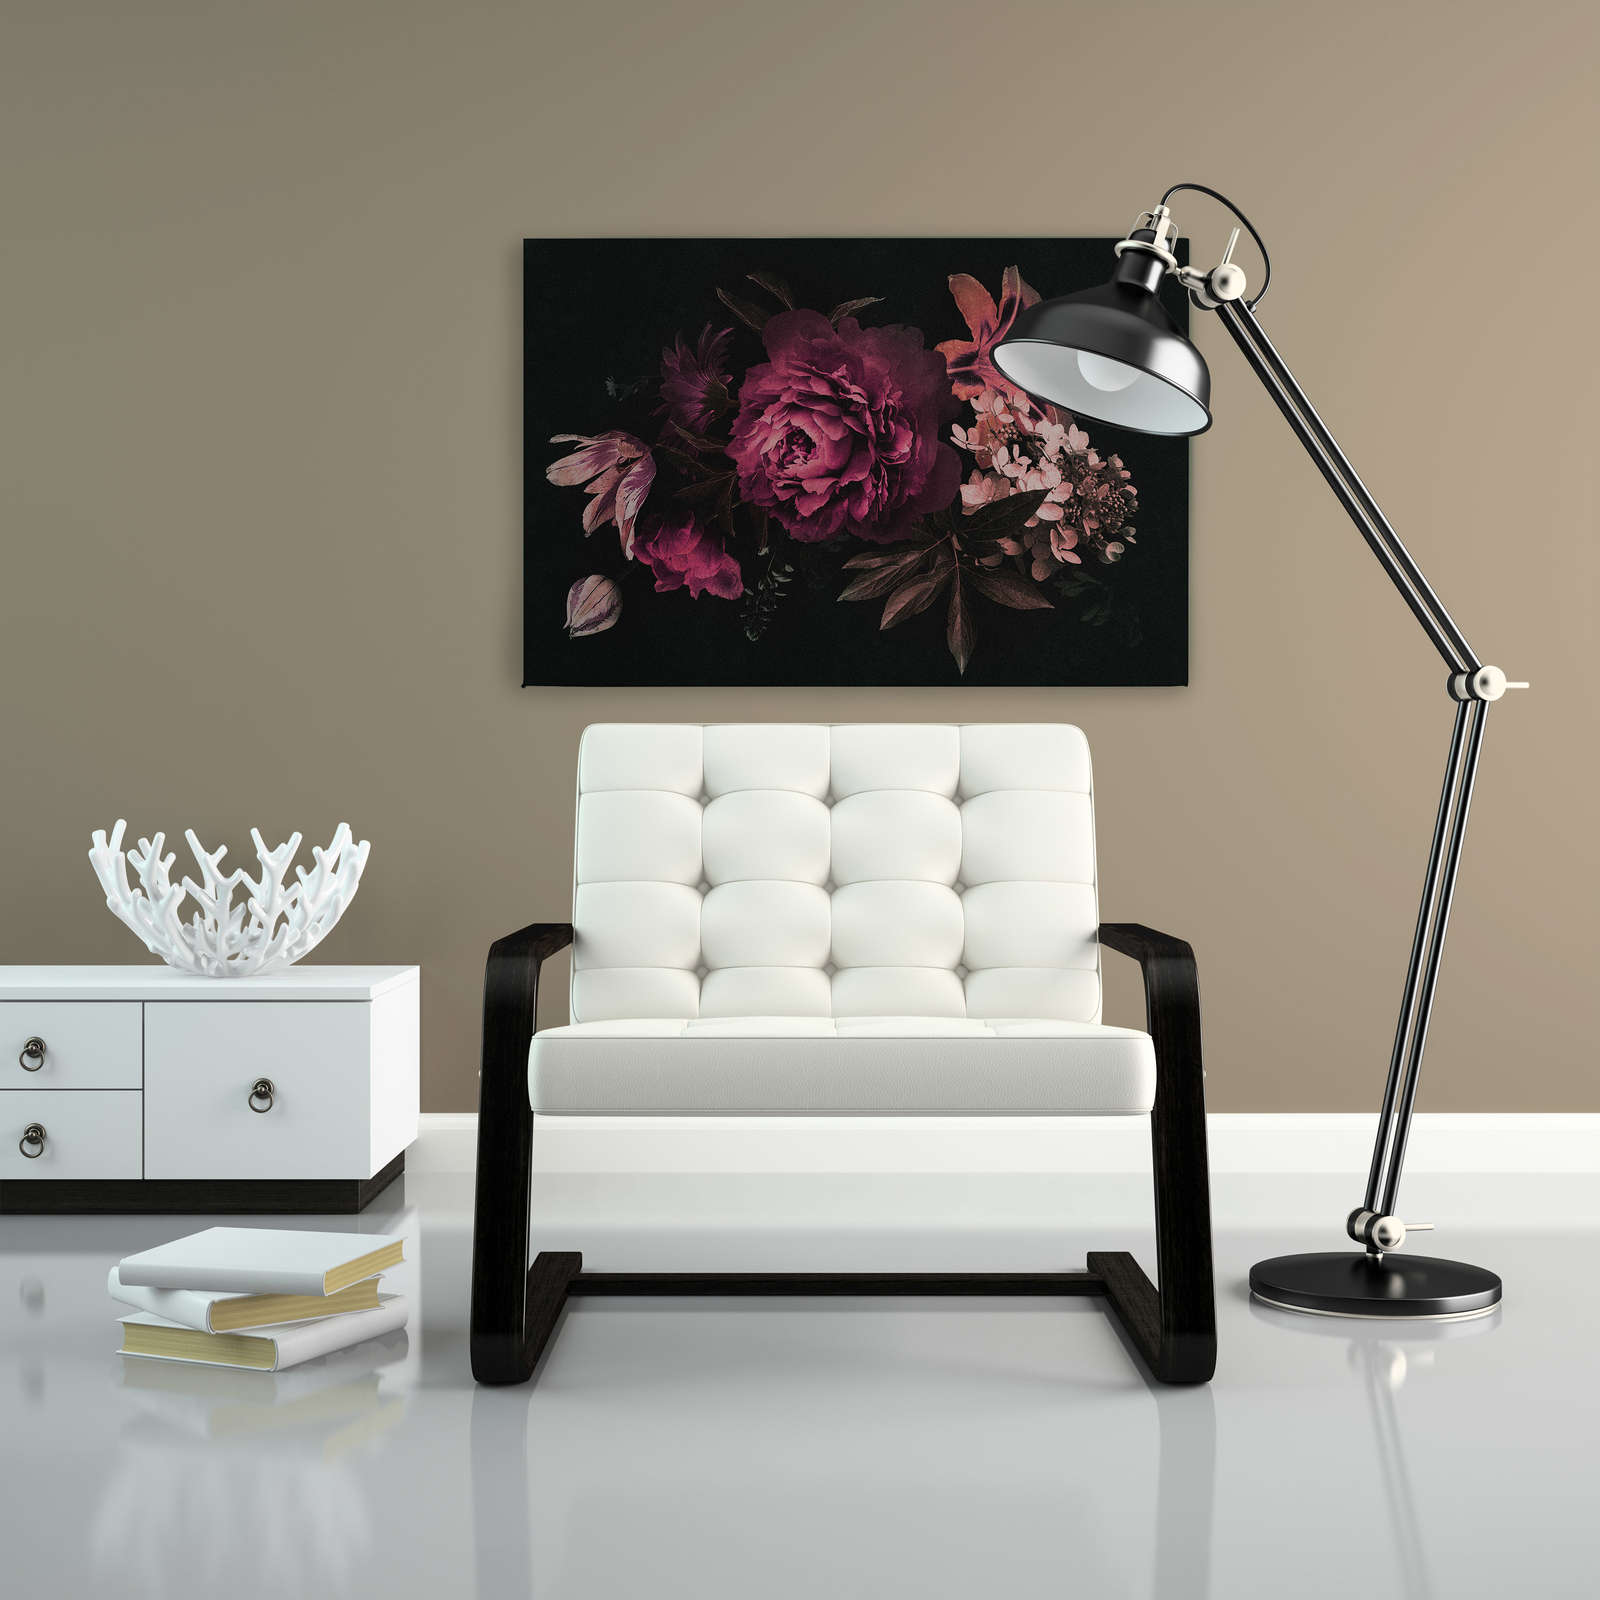             Drama queen 3 - Canvas painting romantic bouquet of flowers- Cardboard structure - 0.90 m x 0.60 m
        